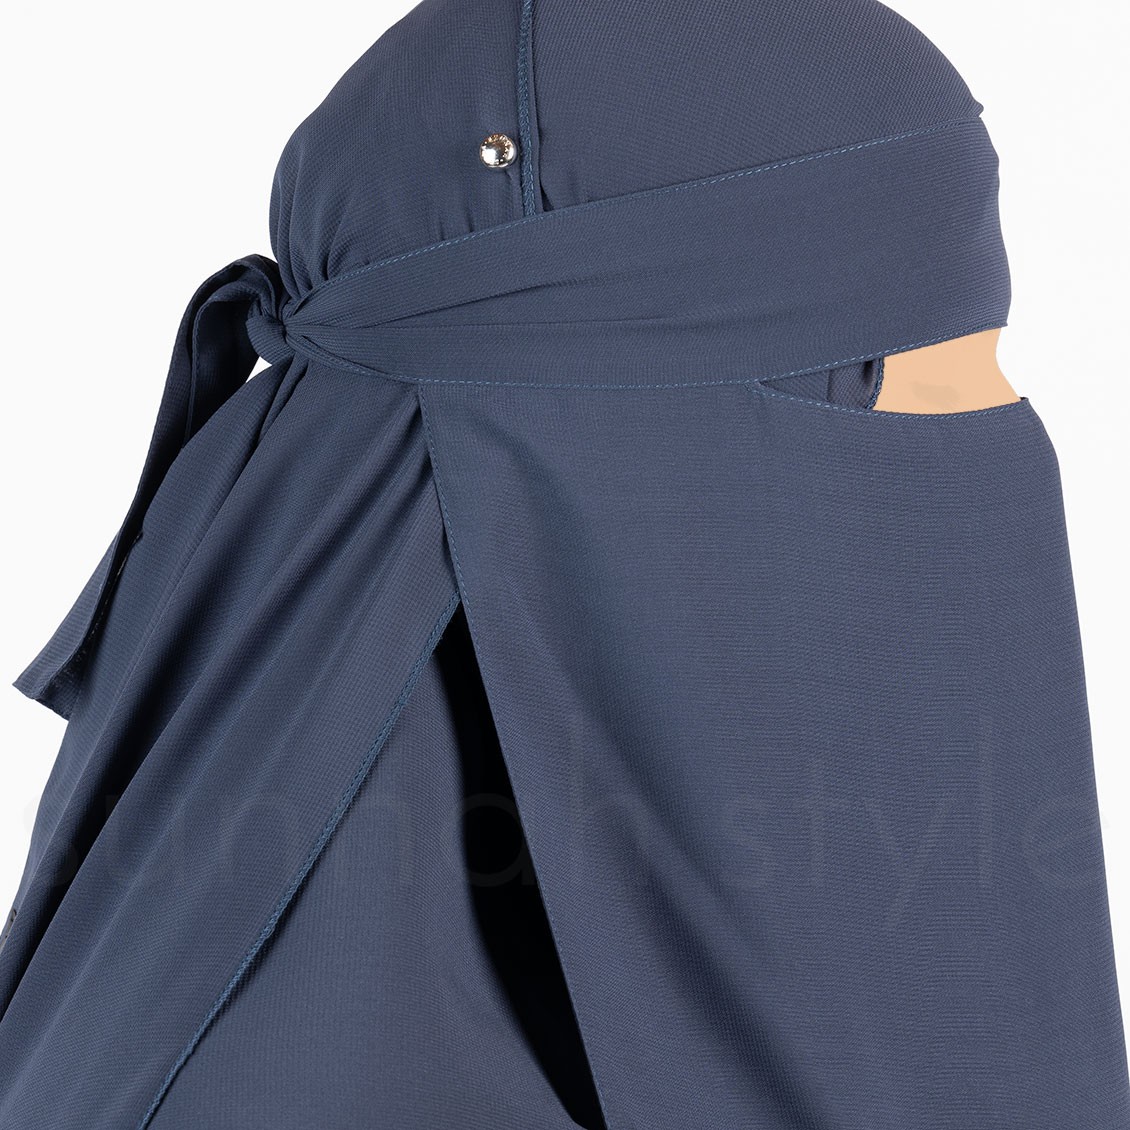 Sunnah Style One Layer One Piece Niqab Steel Blue